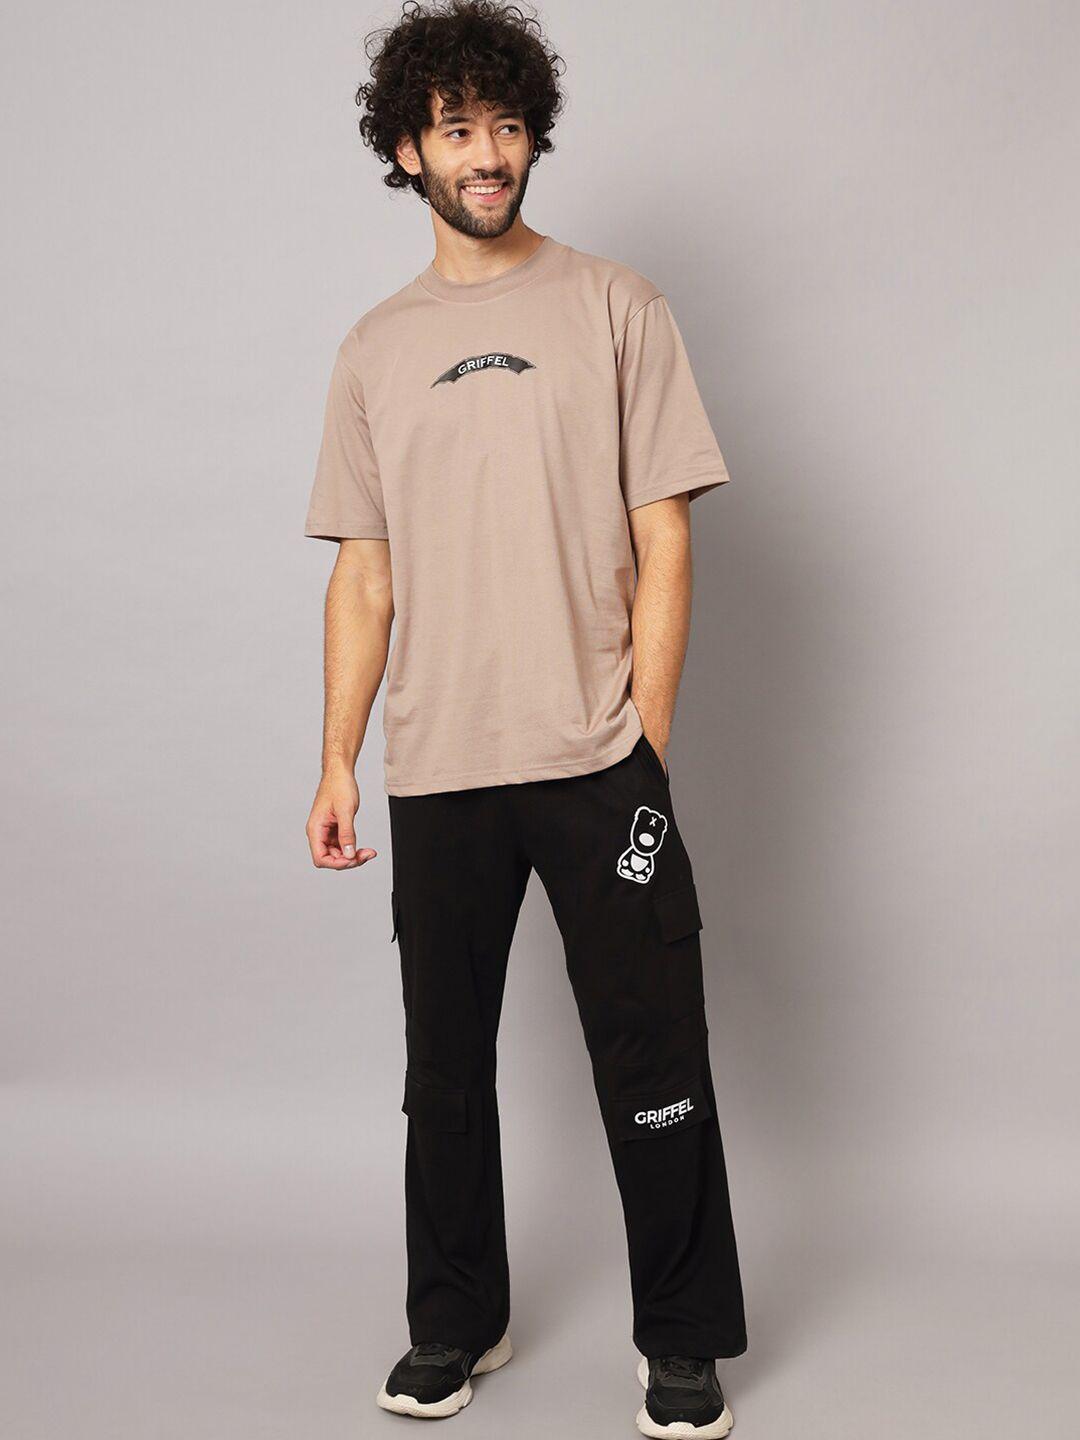 griffel men printed t-shirt with trousers cotton tracksuits